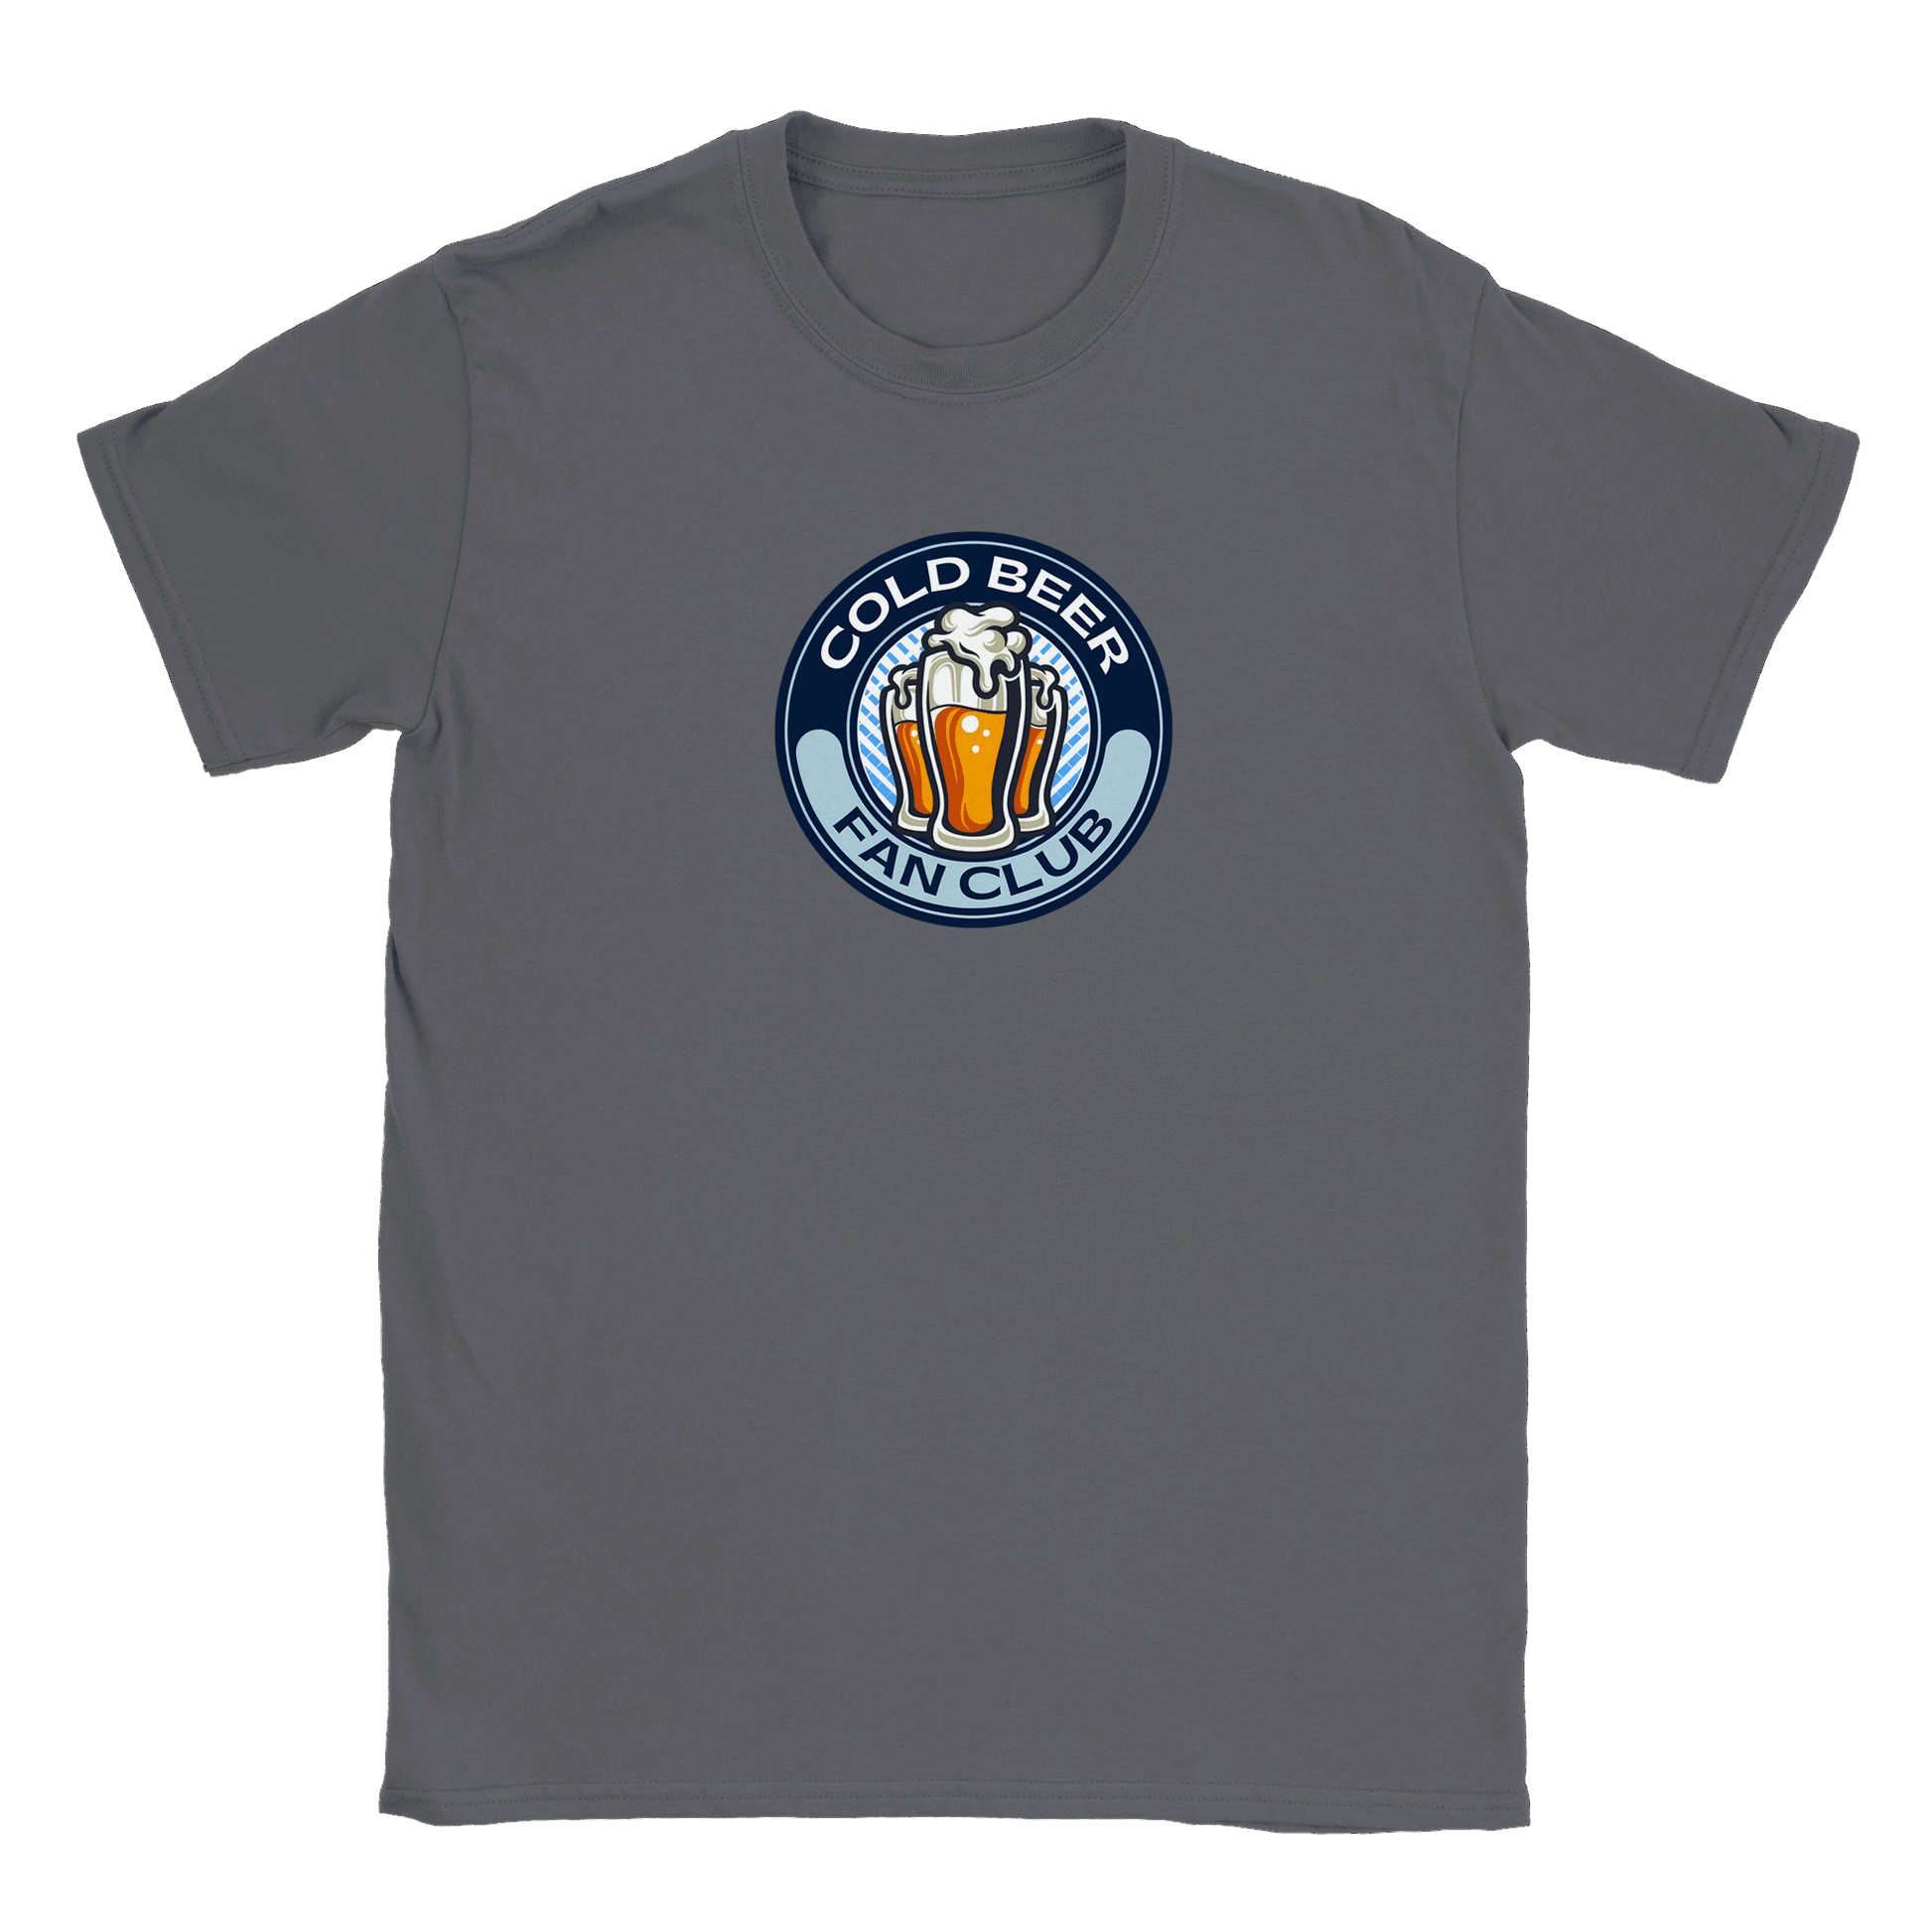 Cold Beer Fan Club - T-shirt Charcoal